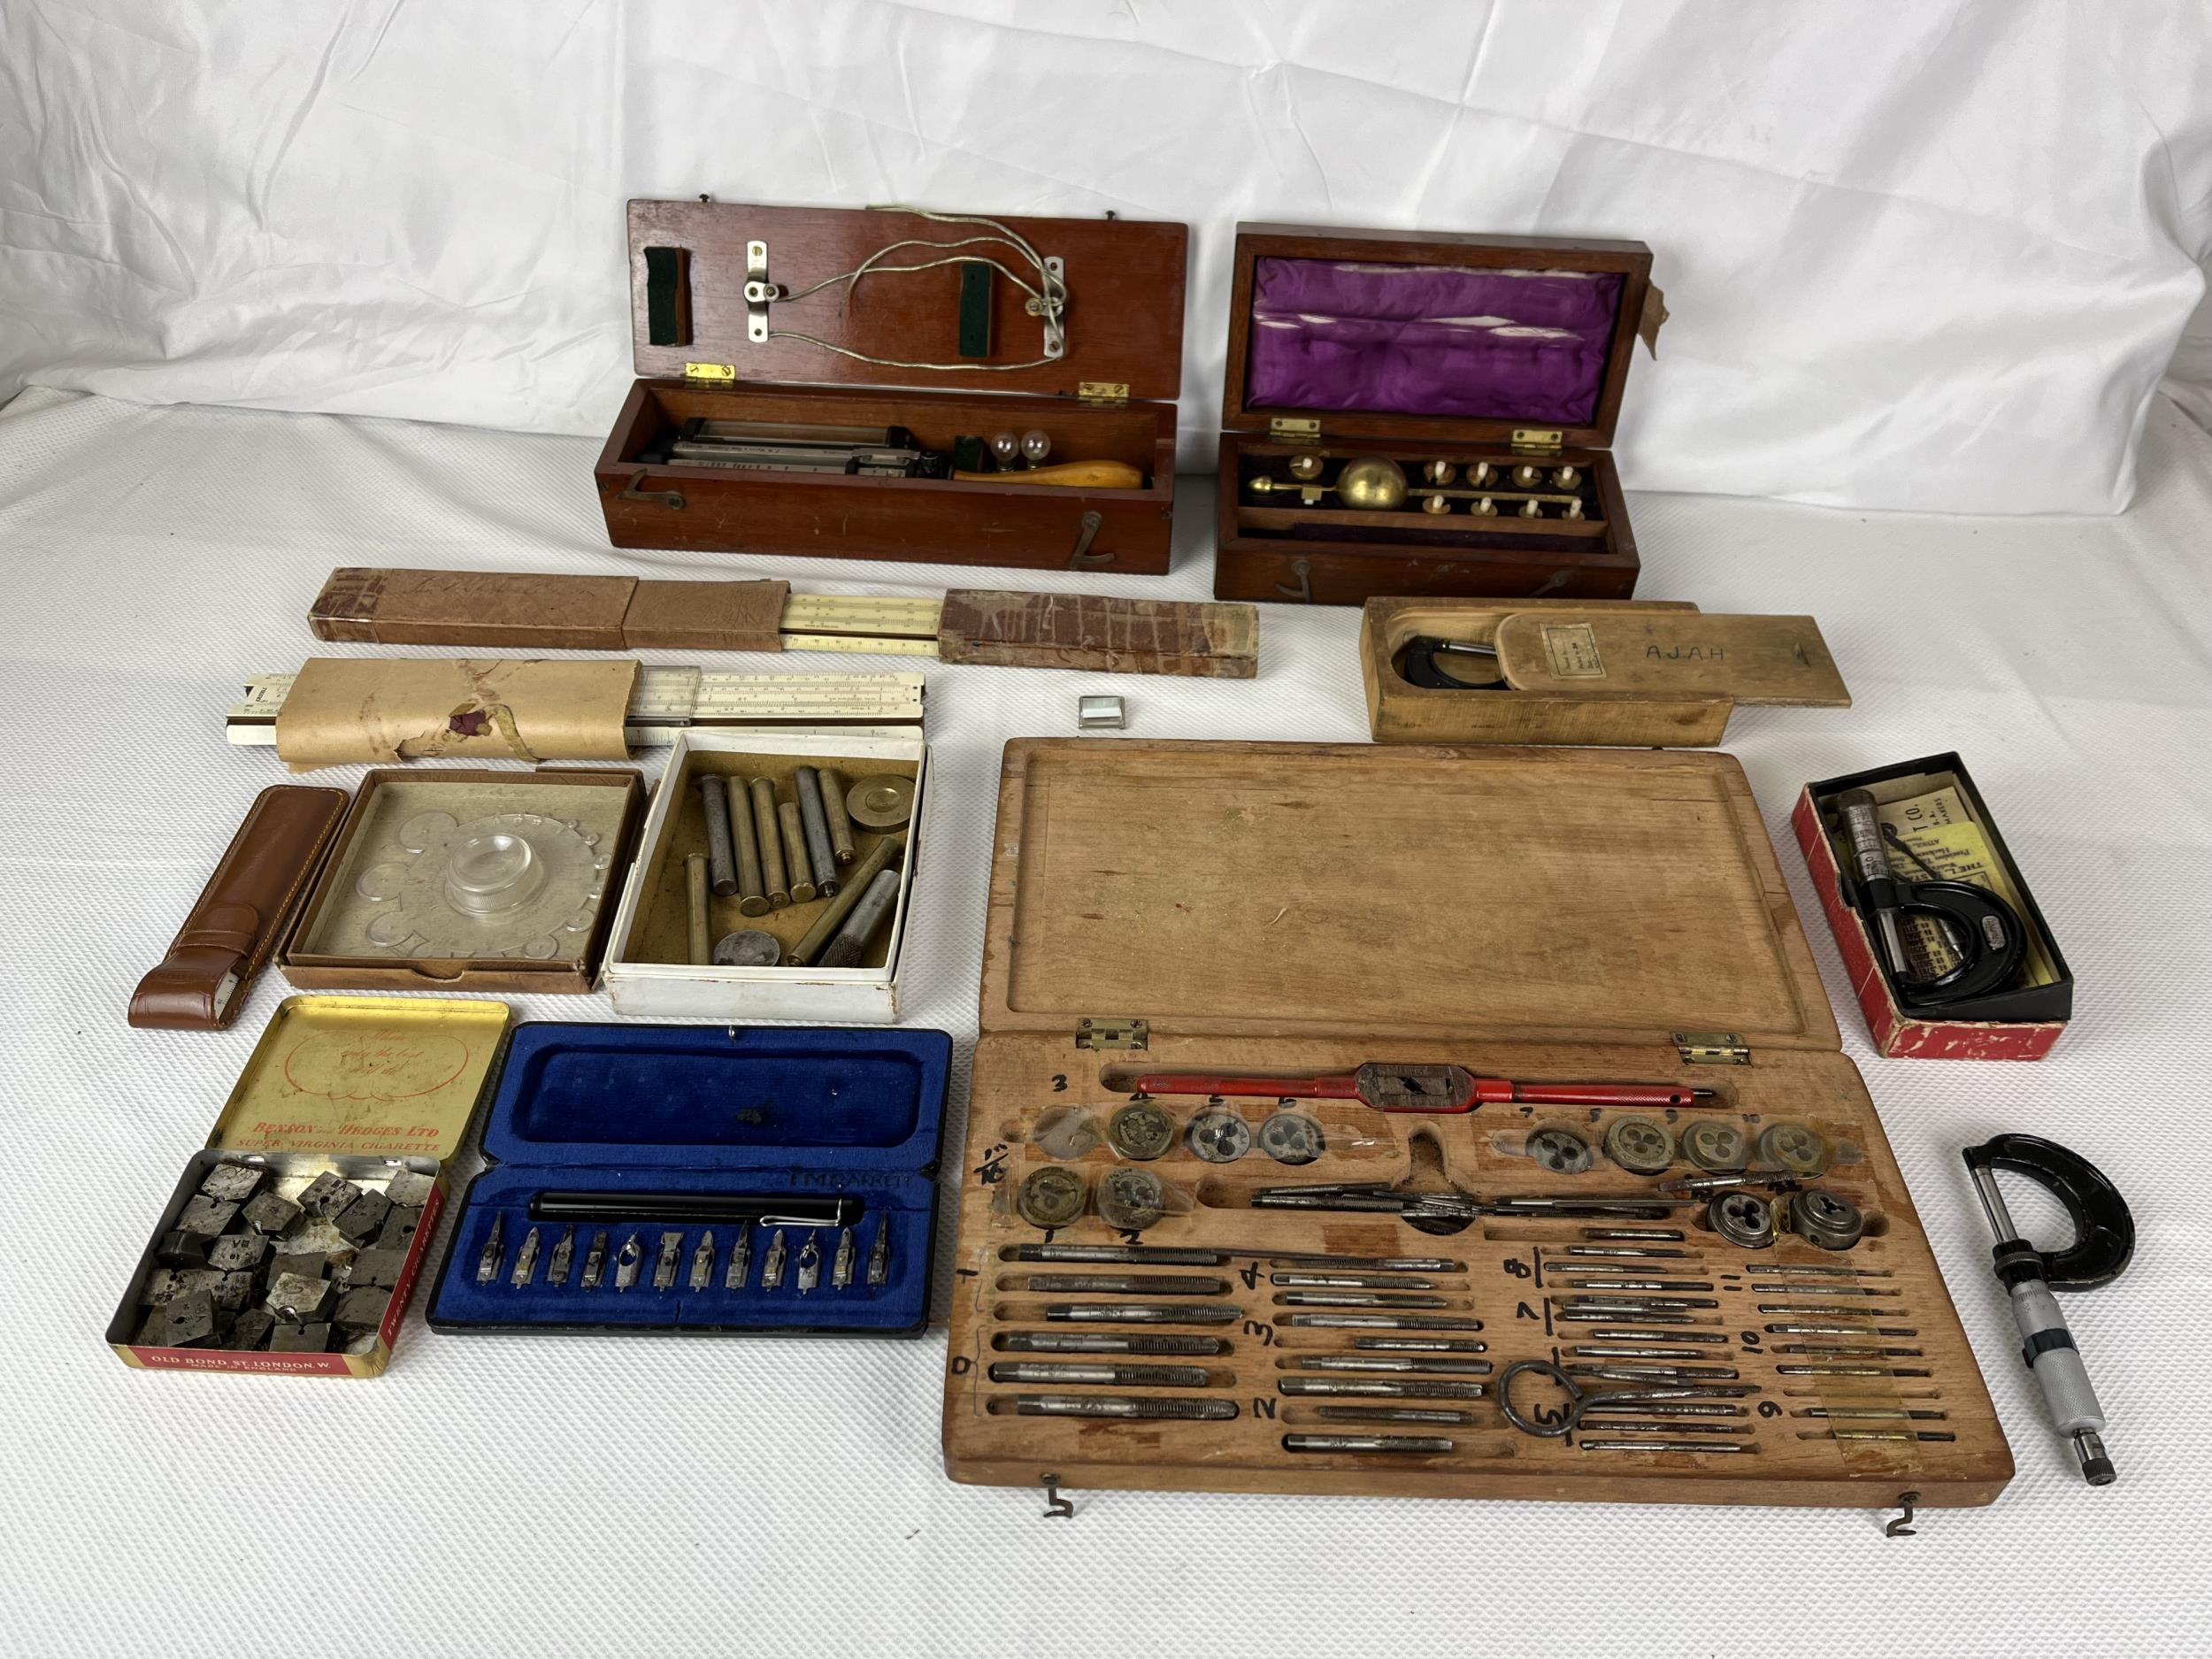 A miscellaneous collection of vintage tools and engineering equipment.